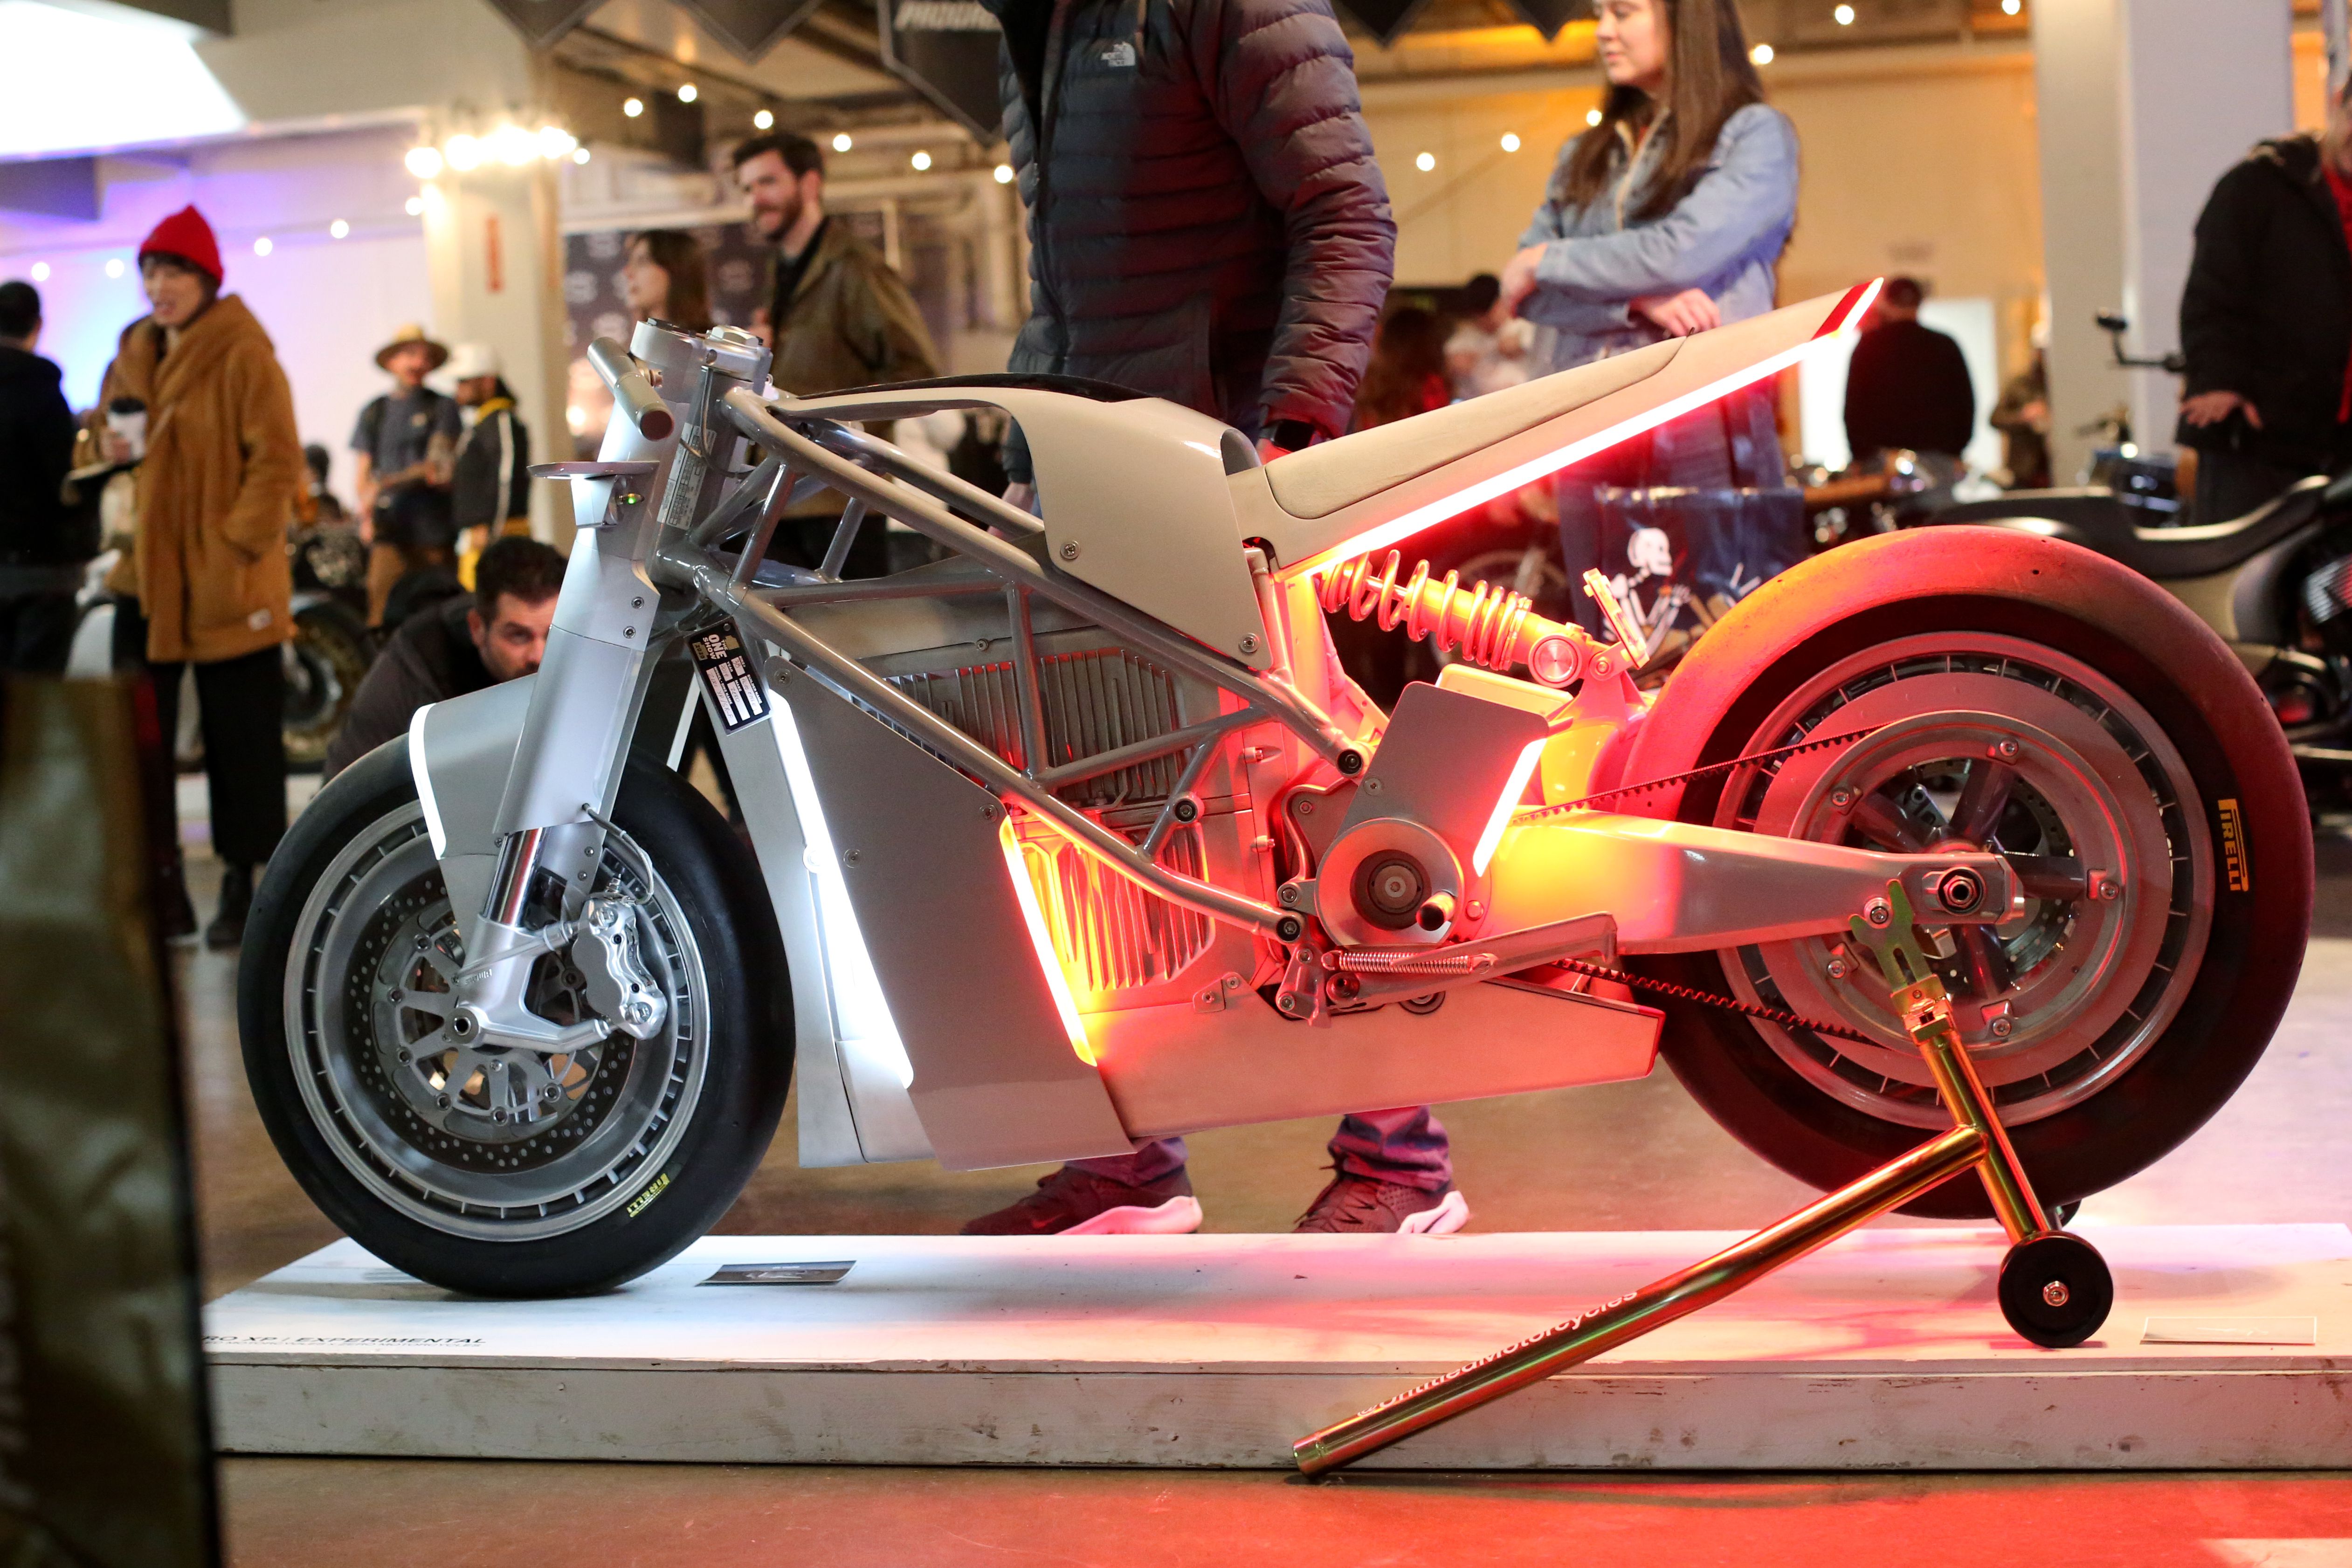 Custom Motorcycles Of The One Motorcycle Show 2020 Cycle World